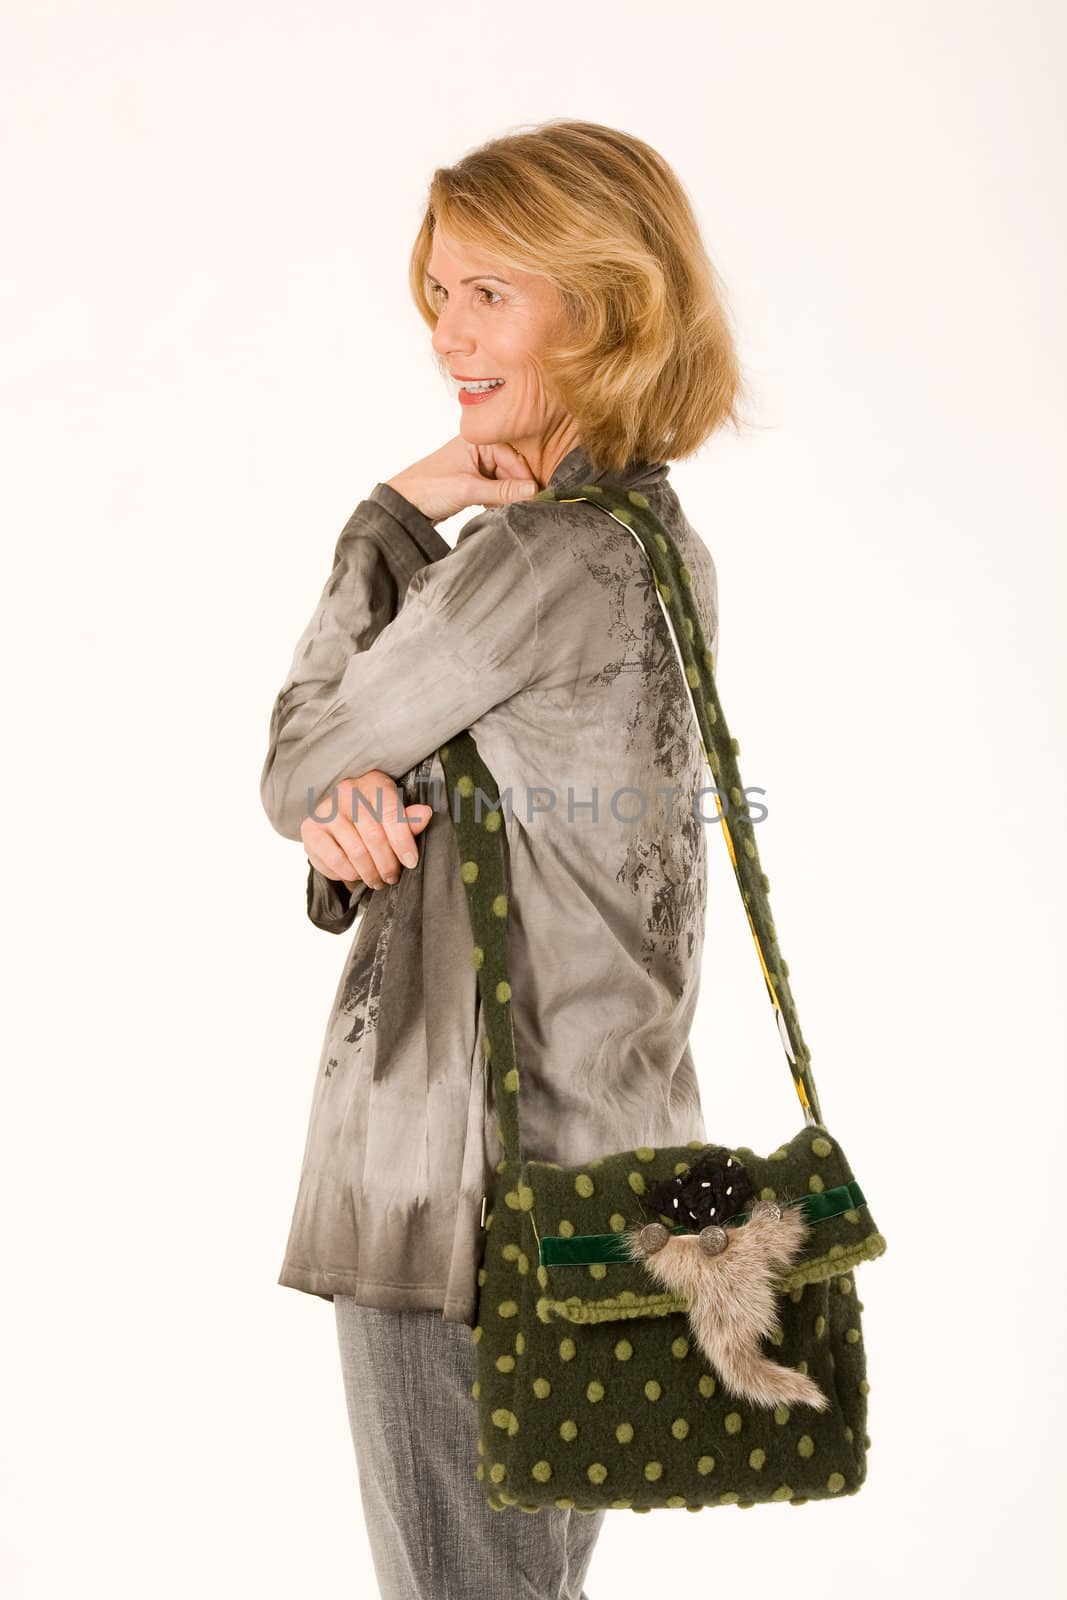 smiling lady with a designer handbag by STphotography